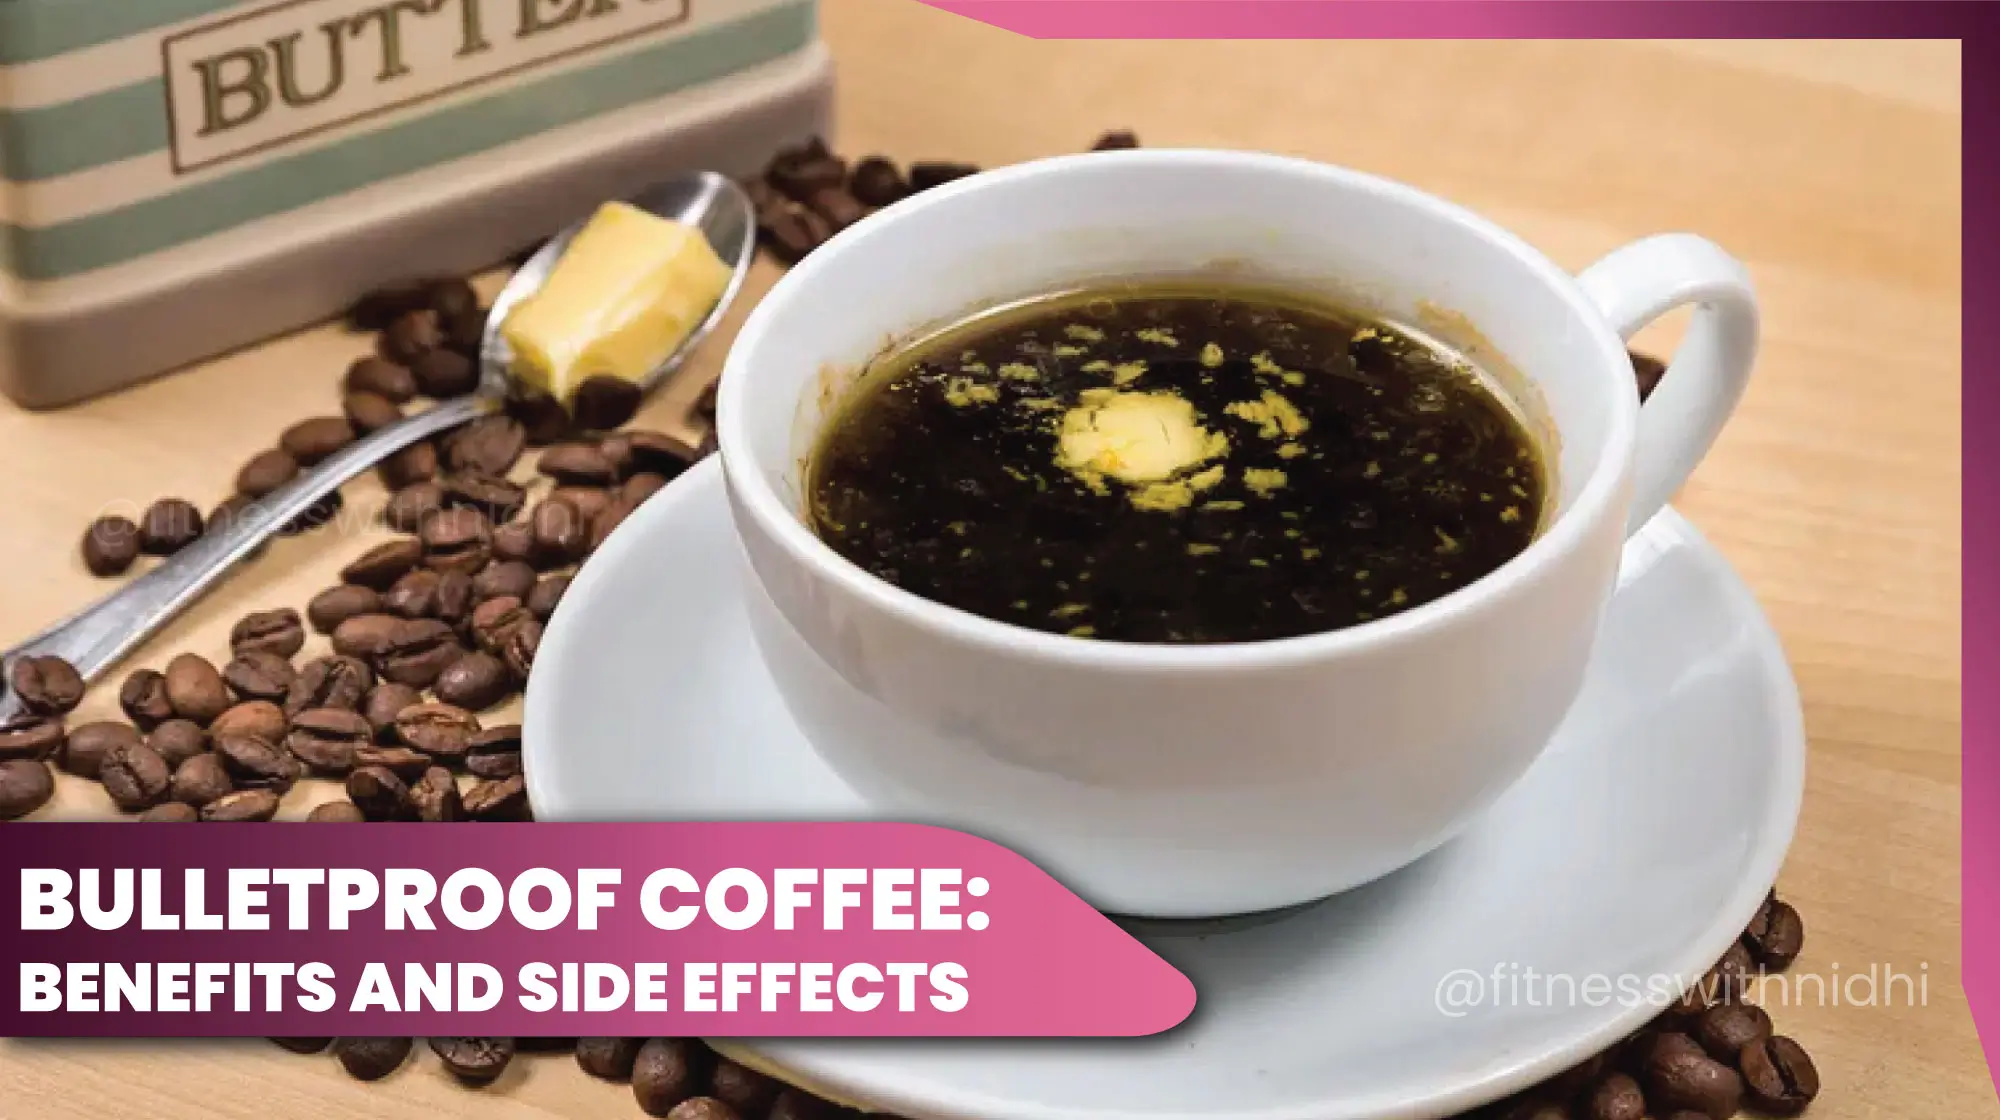 11how to make bulletproof coffee, benefits and side effects